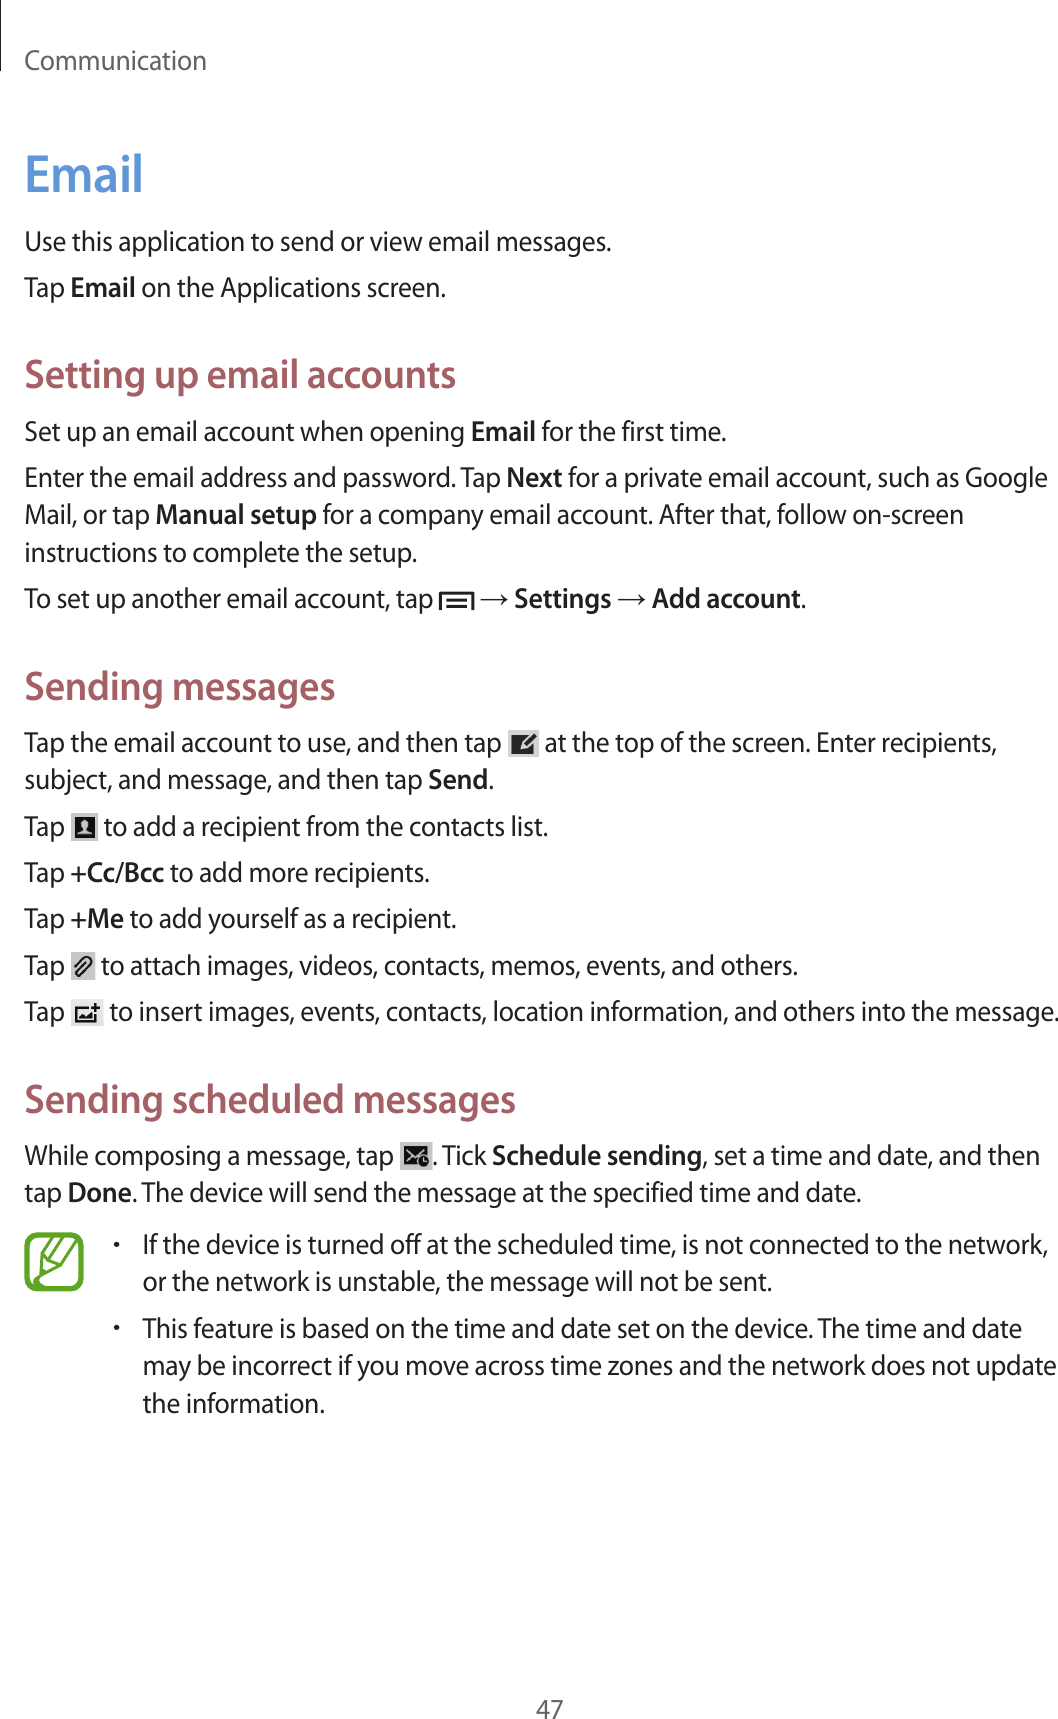 Communication47EmailUse this application to send or view email messages.Tap Email on the Applications screen.Setting up email accountsSet up an email account when opening Email for the first time.Enter the email address and password. Tap Next for a private email account, such as Google Mail, or tap Manual setup for a company email account. After that, follow on-screen instructions to complete the setup.To set up another email account, tap   → Settings → Add account.Sending messagesTap the email account to use, and then tap   at the top of the screen. Enter recipients, subject, and message, and then tap Send.Tap   to add a recipient from the contacts list.Tap +Cc/Bcc to add more recipients.Tap +Me to add yourself as a recipient.Tap   to attach images, videos, contacts, memos, events, and others.Tap   to insert images, events, contacts, location information, and others into the message.Sending scheduled messagesWhile composing a message, tap  . Tick Schedule sending, set a time and date, and then tap Done. The device will send the message at the specified time and date.•If the device is turned off at the scheduled time, is not connected to the network, or the network is unstable, the message will not be sent.•This feature is based on the time and date set on the device. The time and date may be incorrect if you move across time zones and the network does not update the information.